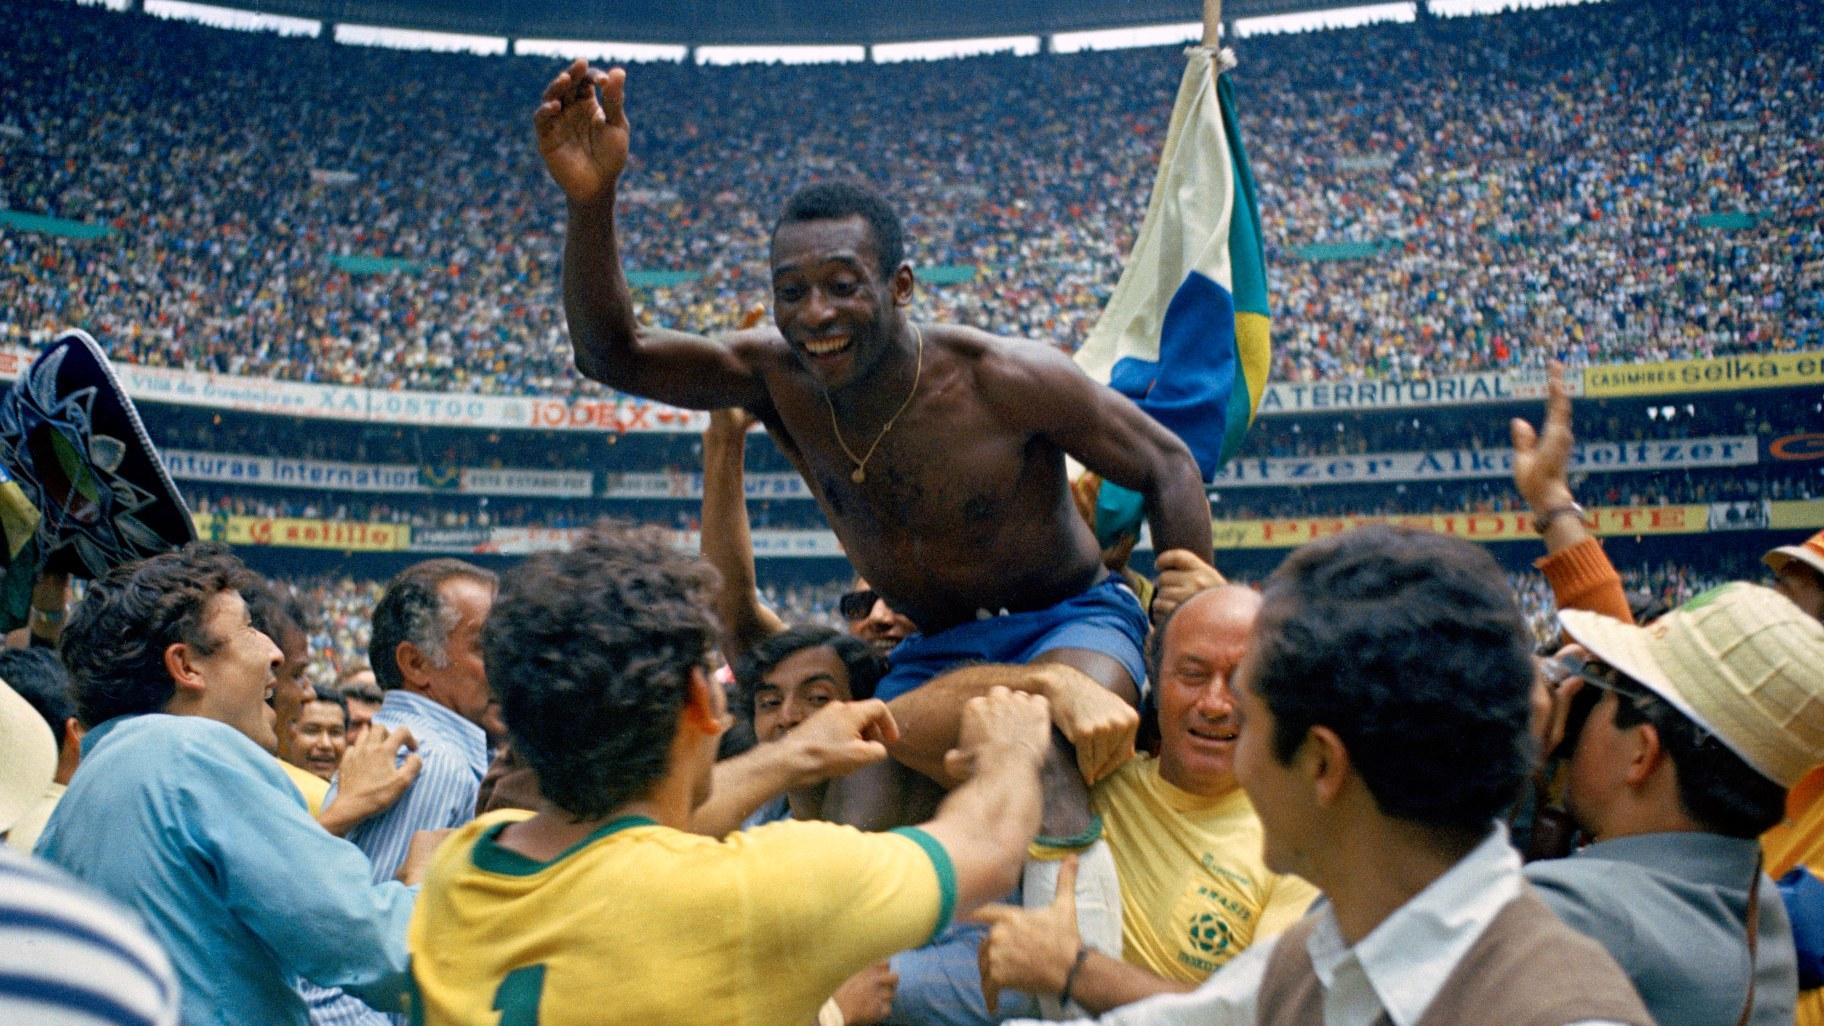 Brazil’s Pele is hoisted on the shoulders of his teammates after Brazil won the World Cup final against Italy, 4-1, in Mexico City’s Estadio Azteca, June 21, 1970. (AP Photo, File)